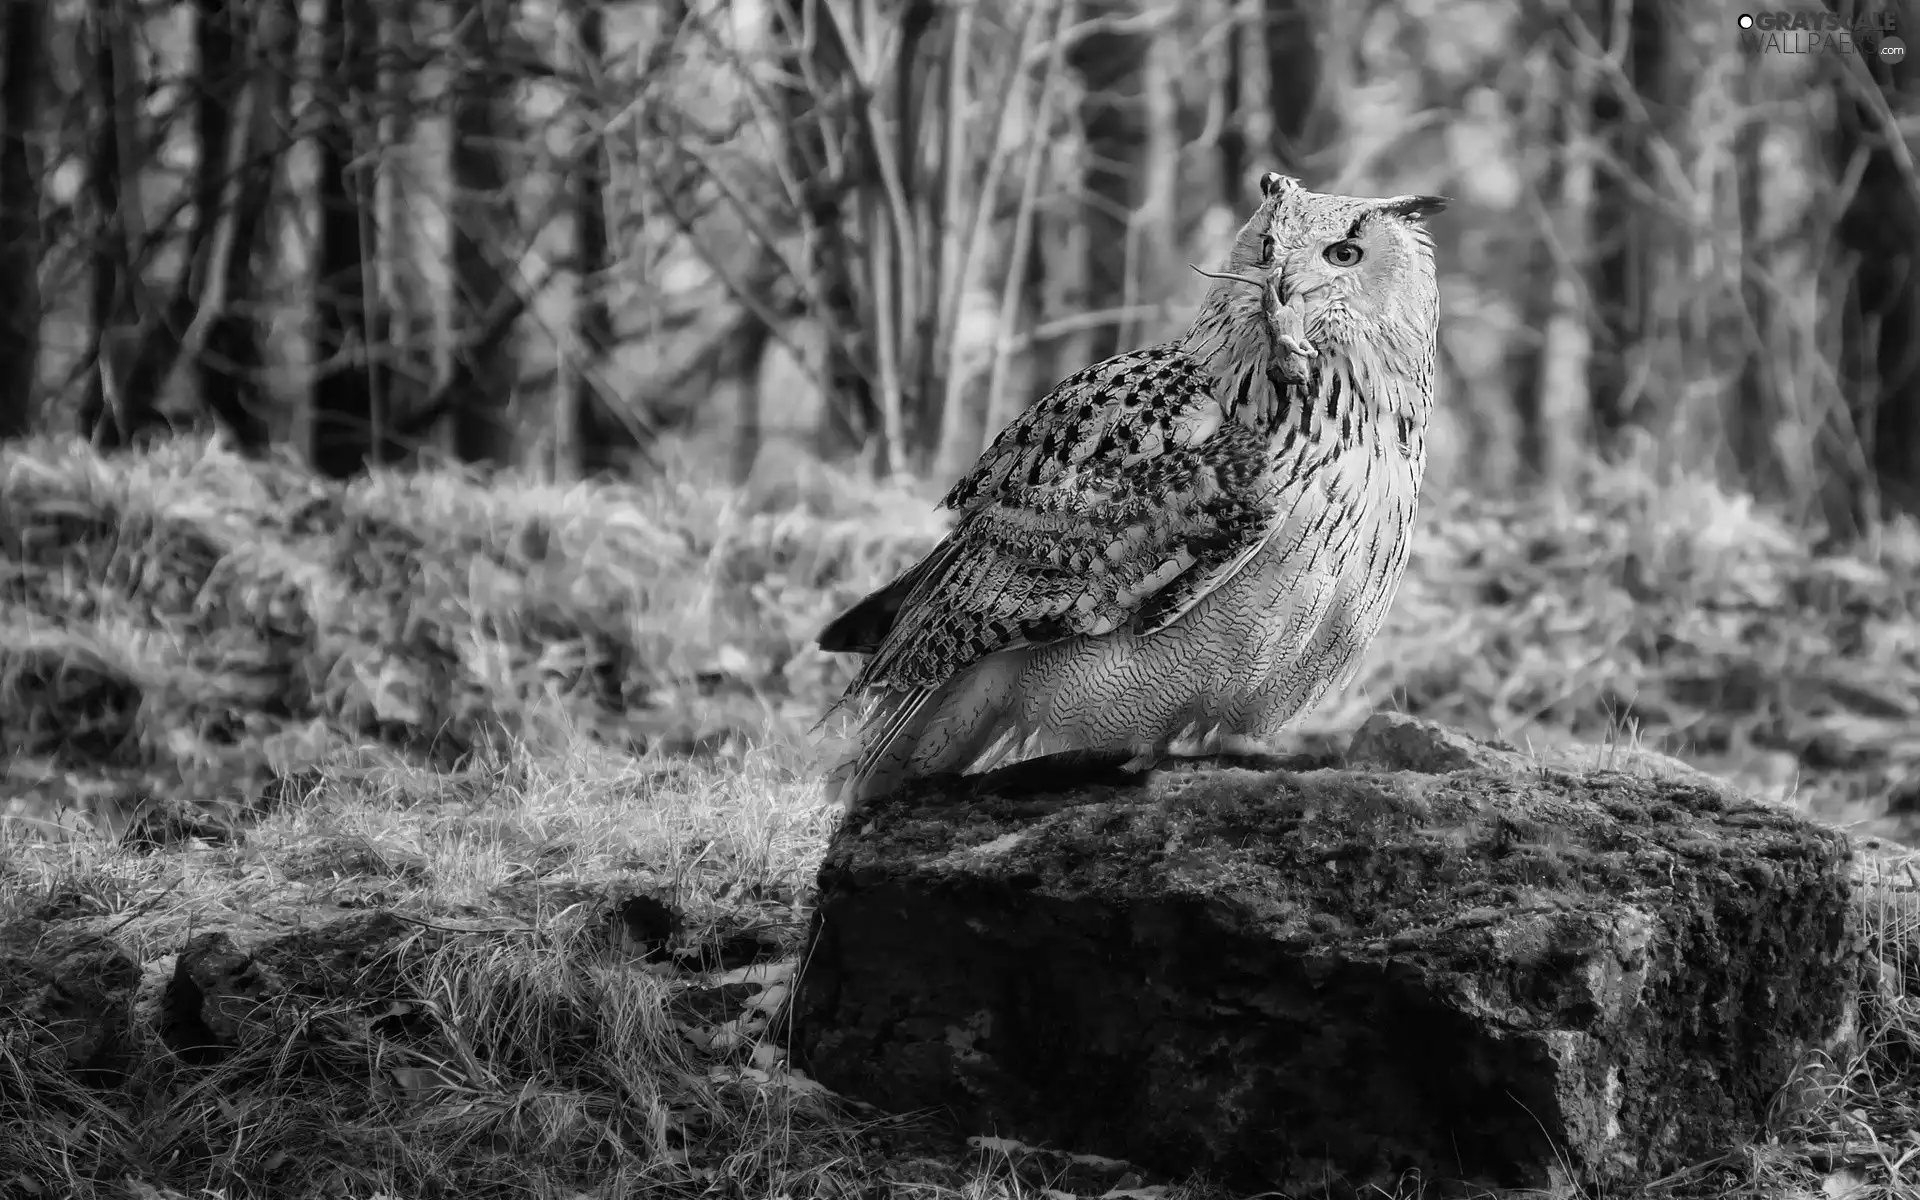 forest, Stone, mouse, litter, owl